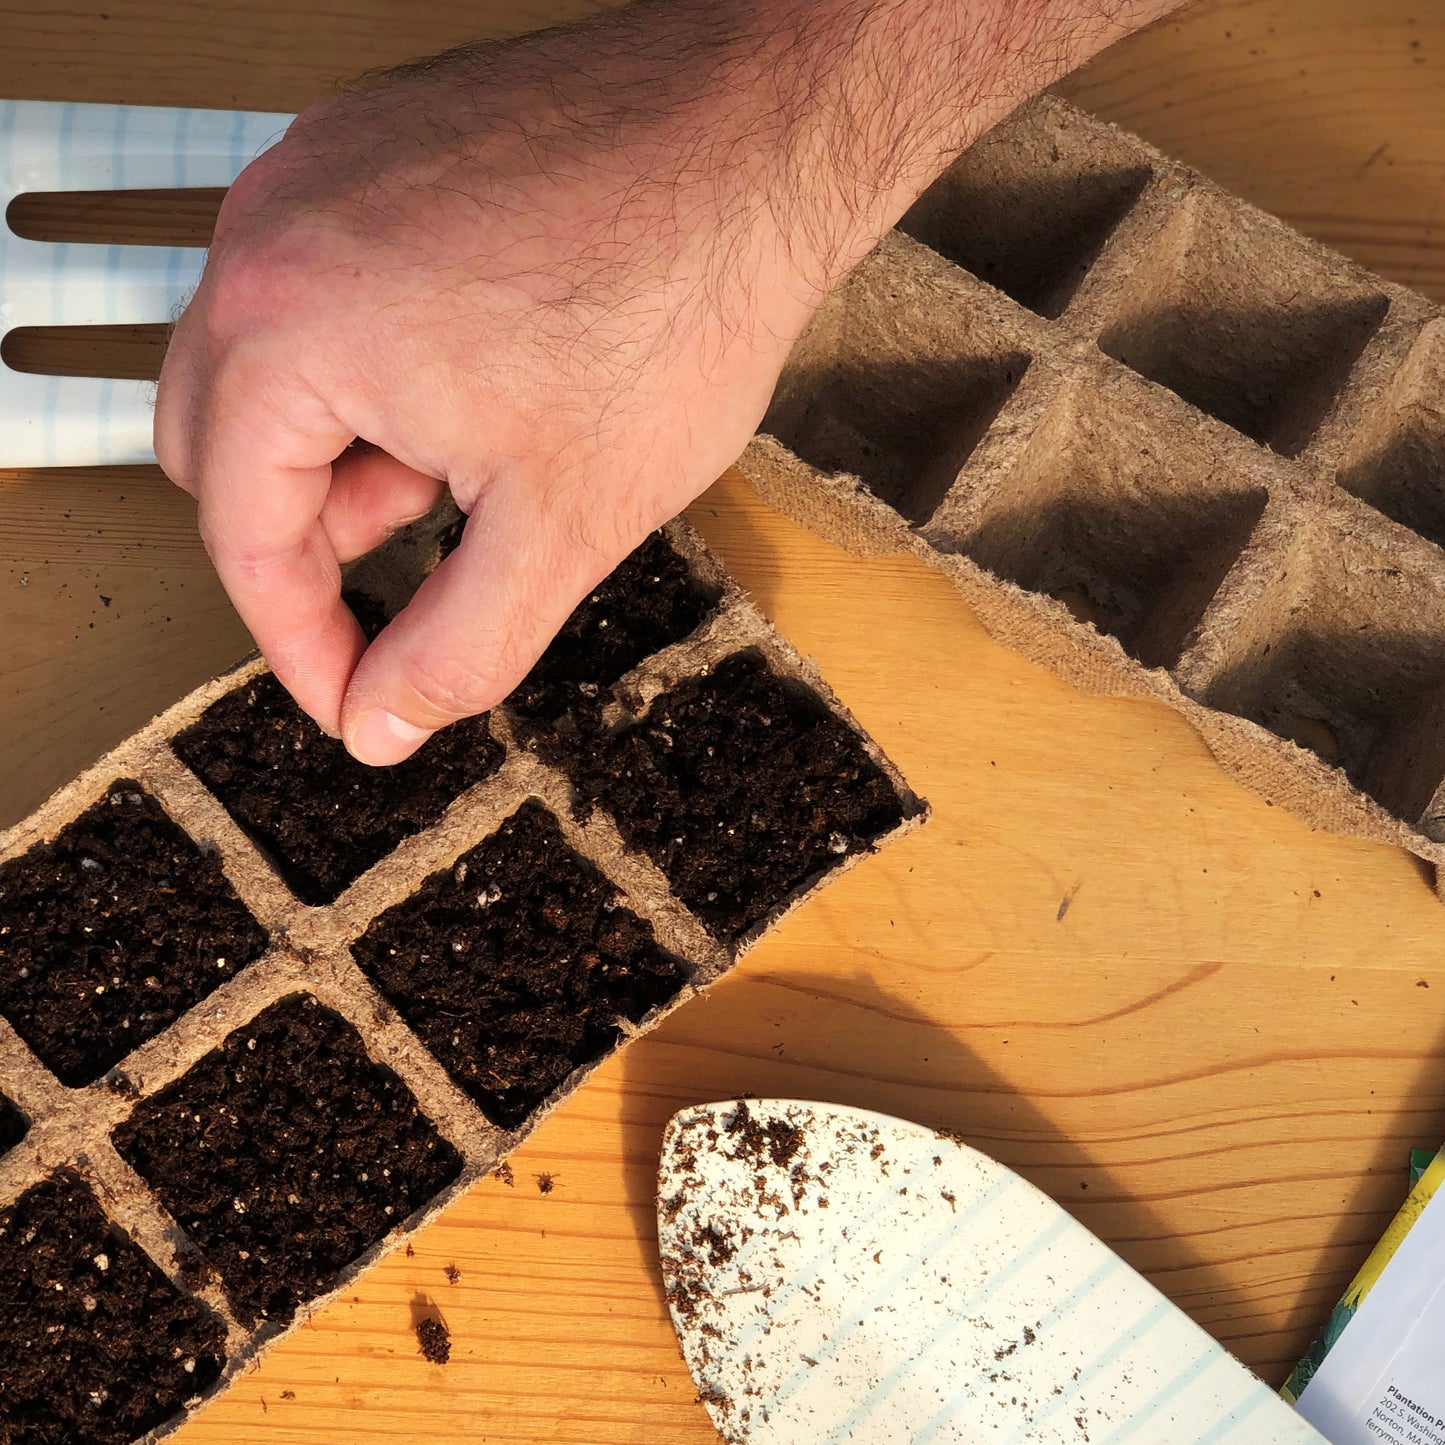 Start your Sow Easy Beefsteak Tomato seeds in Jiffy seed starting peat strip trays for easy transplanting when seedlings are ready.